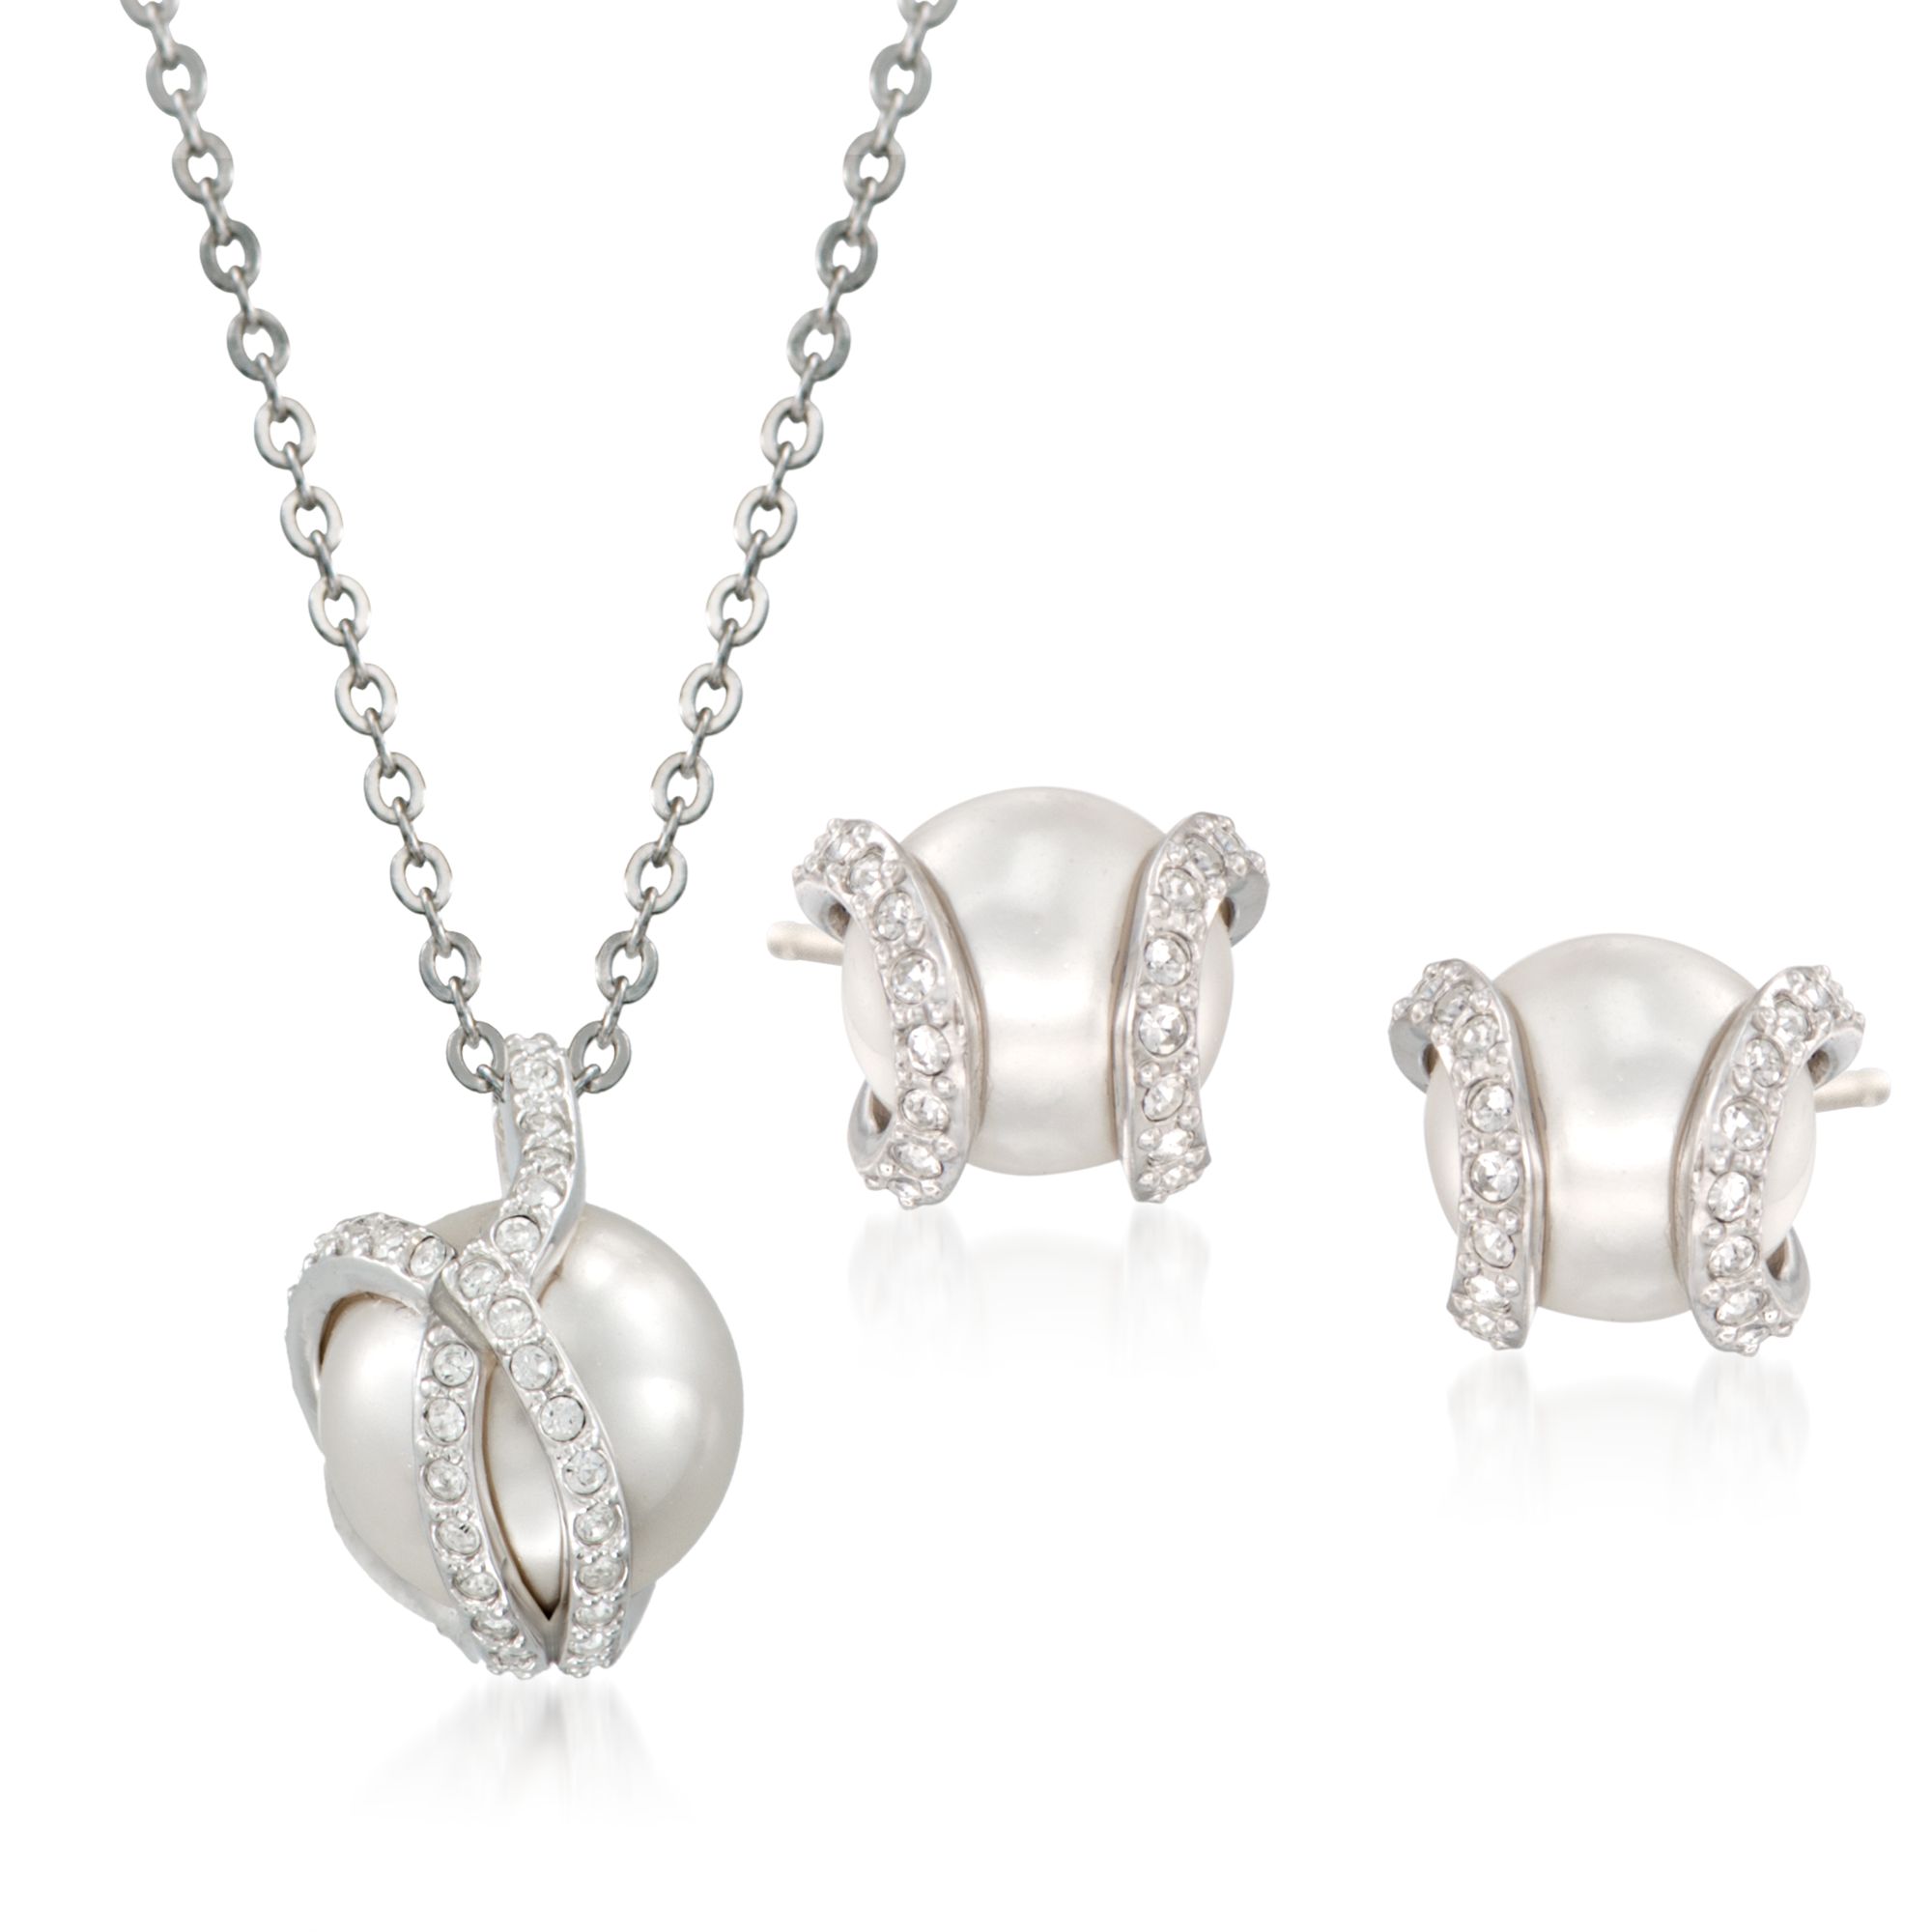 Swarovski Crystal "Nude" 8-10mm Simulated Pearl and Crystal Jewelry Set:  Earrings and Necklace in Silvertone | Ross-Simons